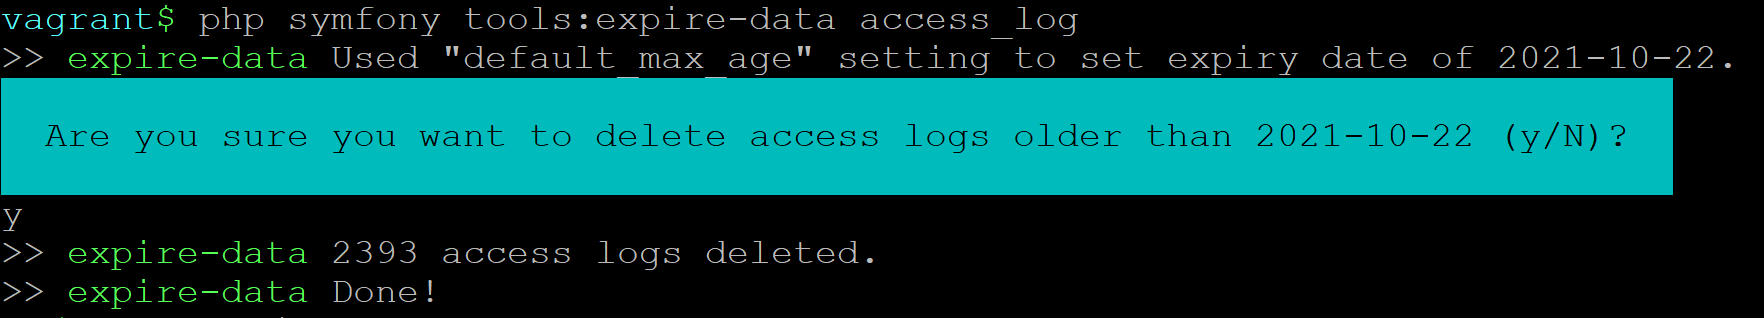 An image showing the confirmation message when running the tools:expire command